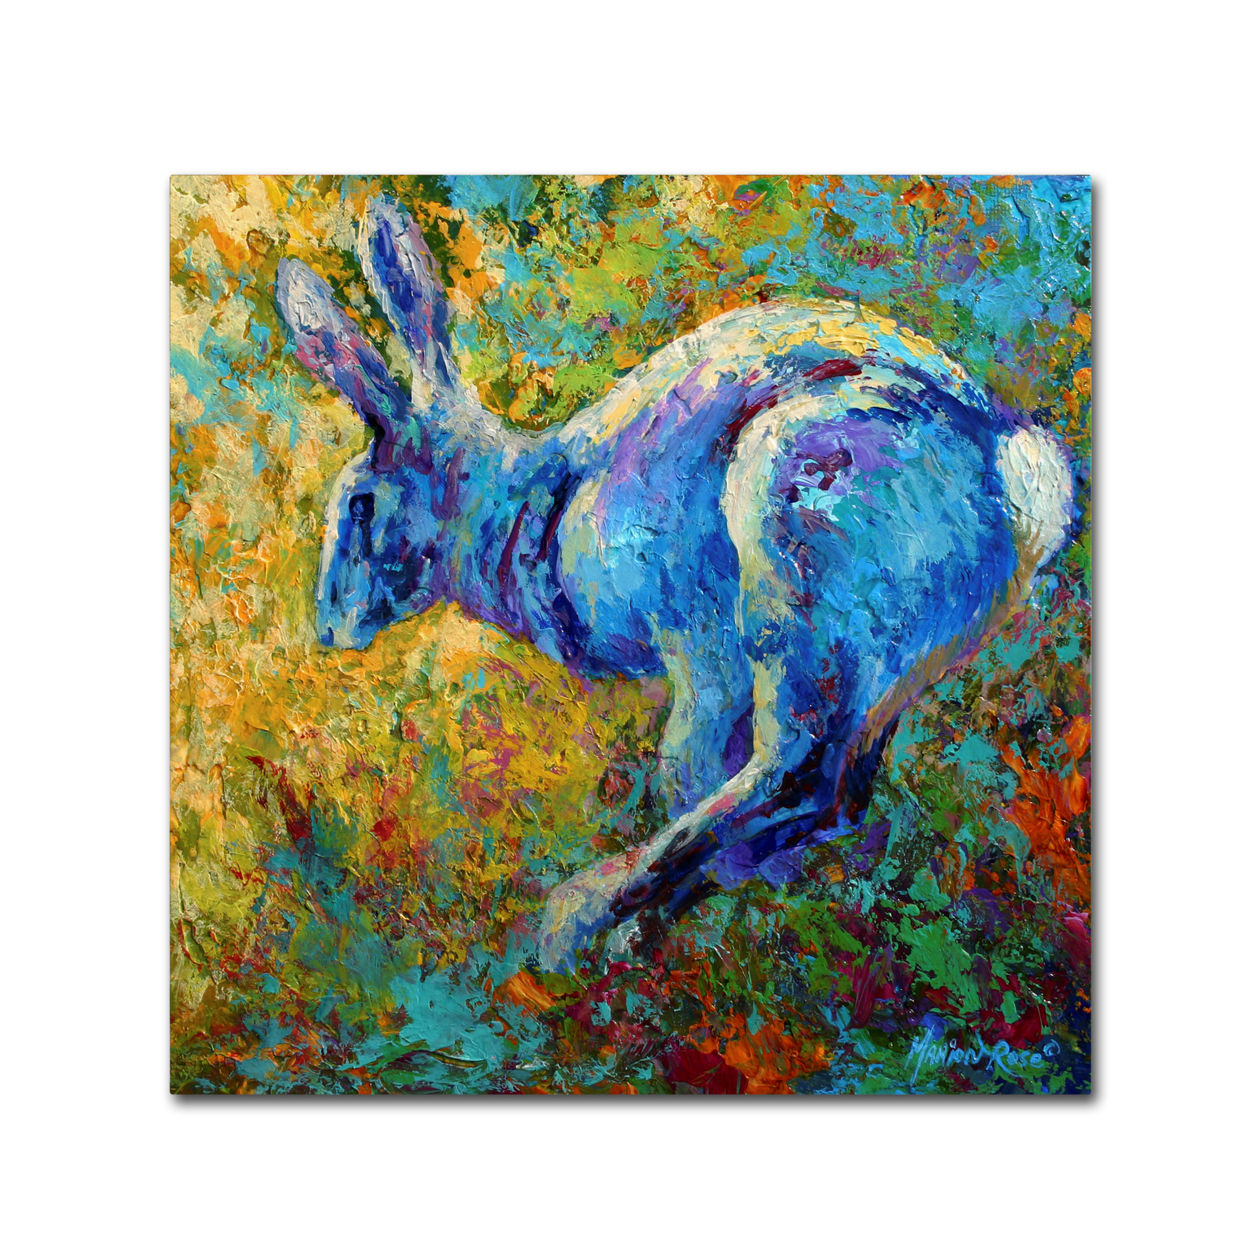 Marion Rose 'Hare' Ready To Hang Canvas Art 18 X 18 Inches Made In USA